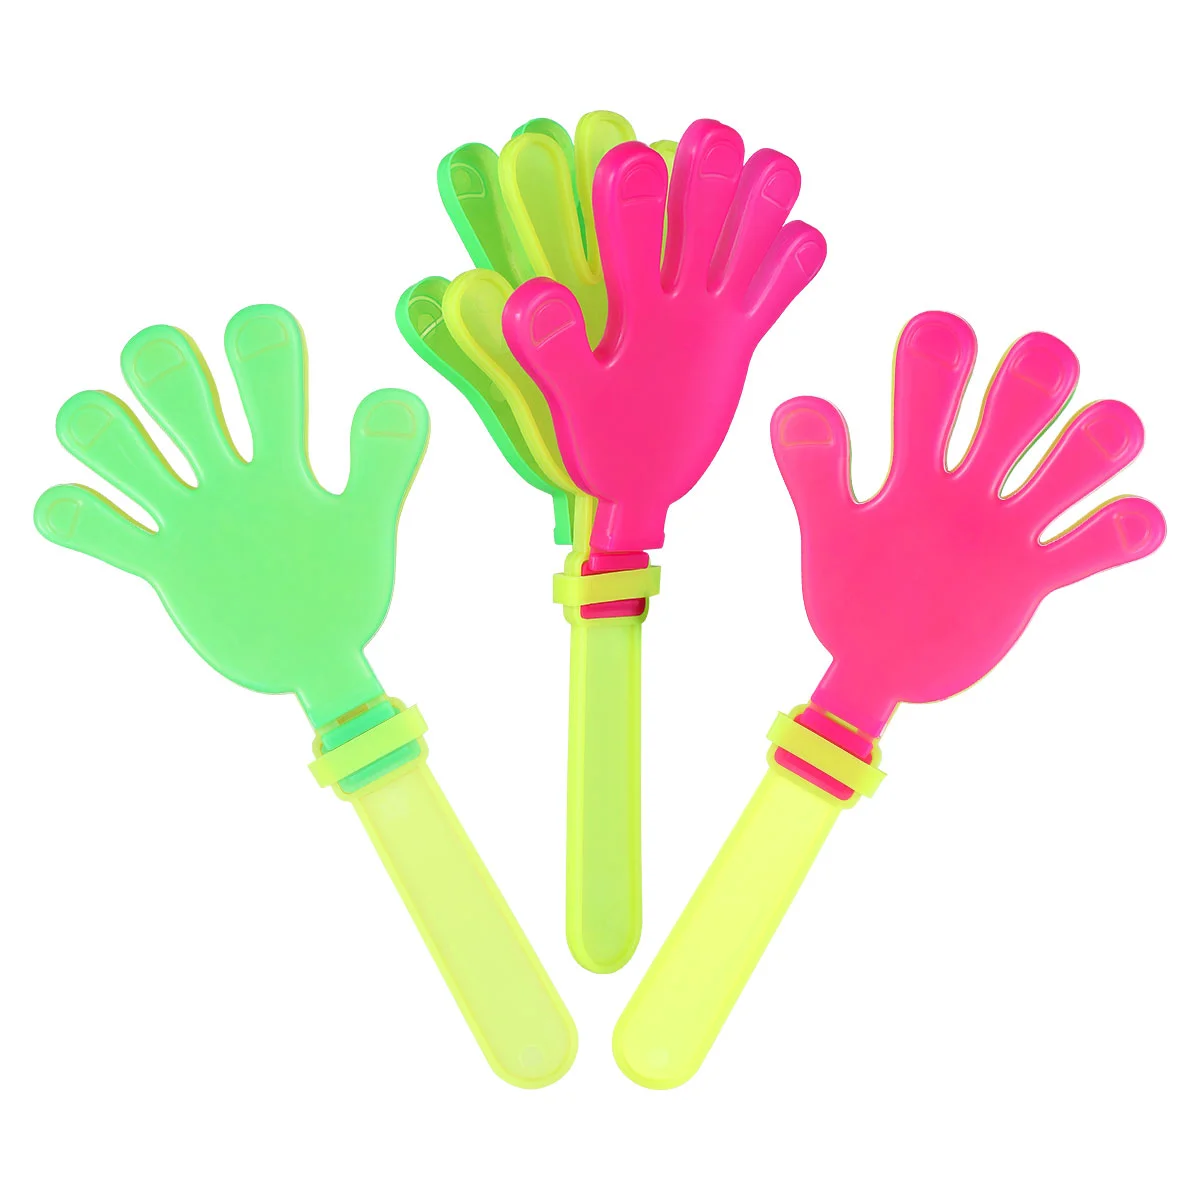 

Hand Makers Noise Clappers Noisemakershands Party Favors Clackers Clapping Clap Clapper Cheer Props Device Funny Applause Toy